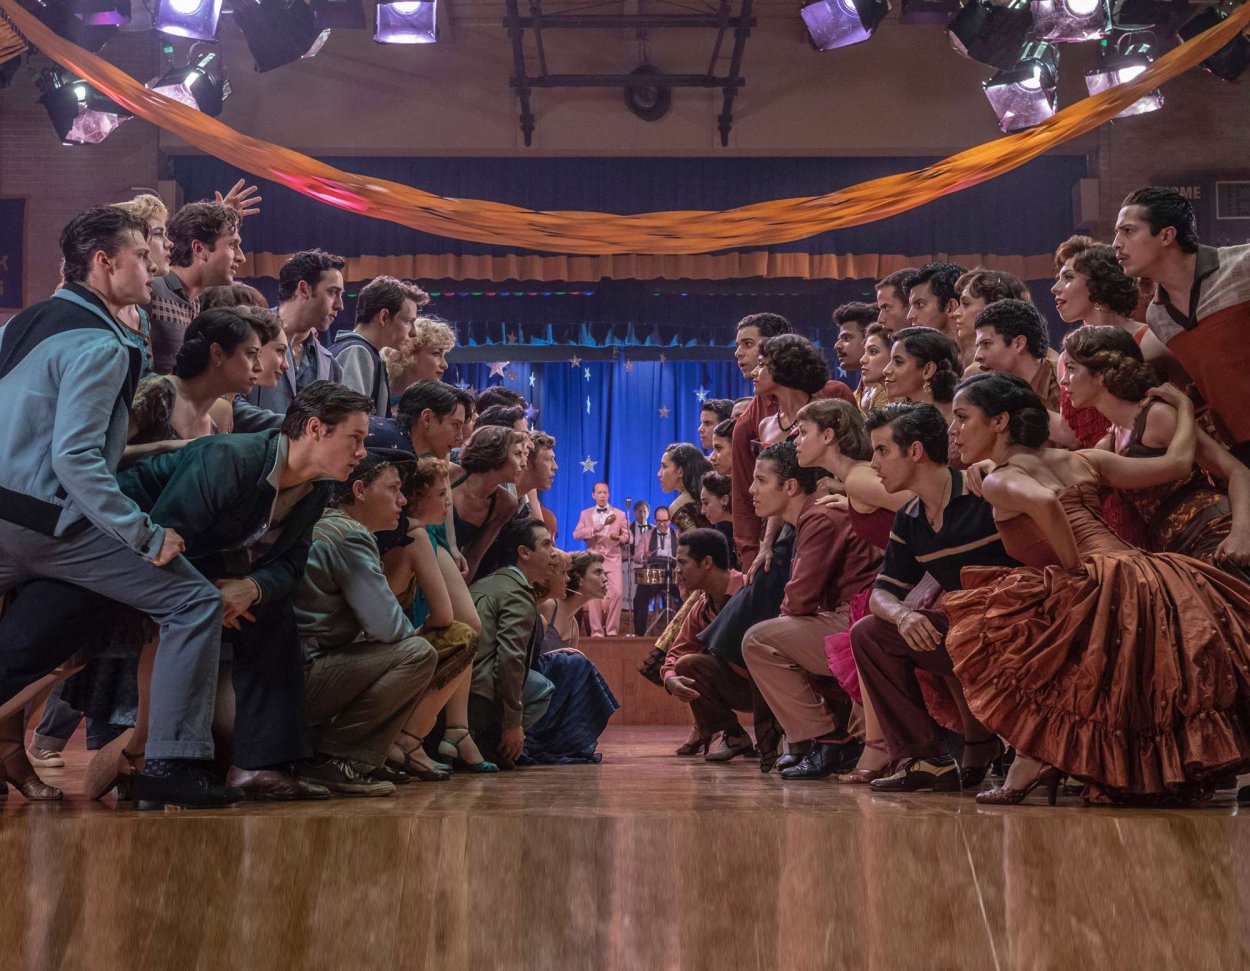 West Side Story' Original Cast Side-by-Side with New Cast